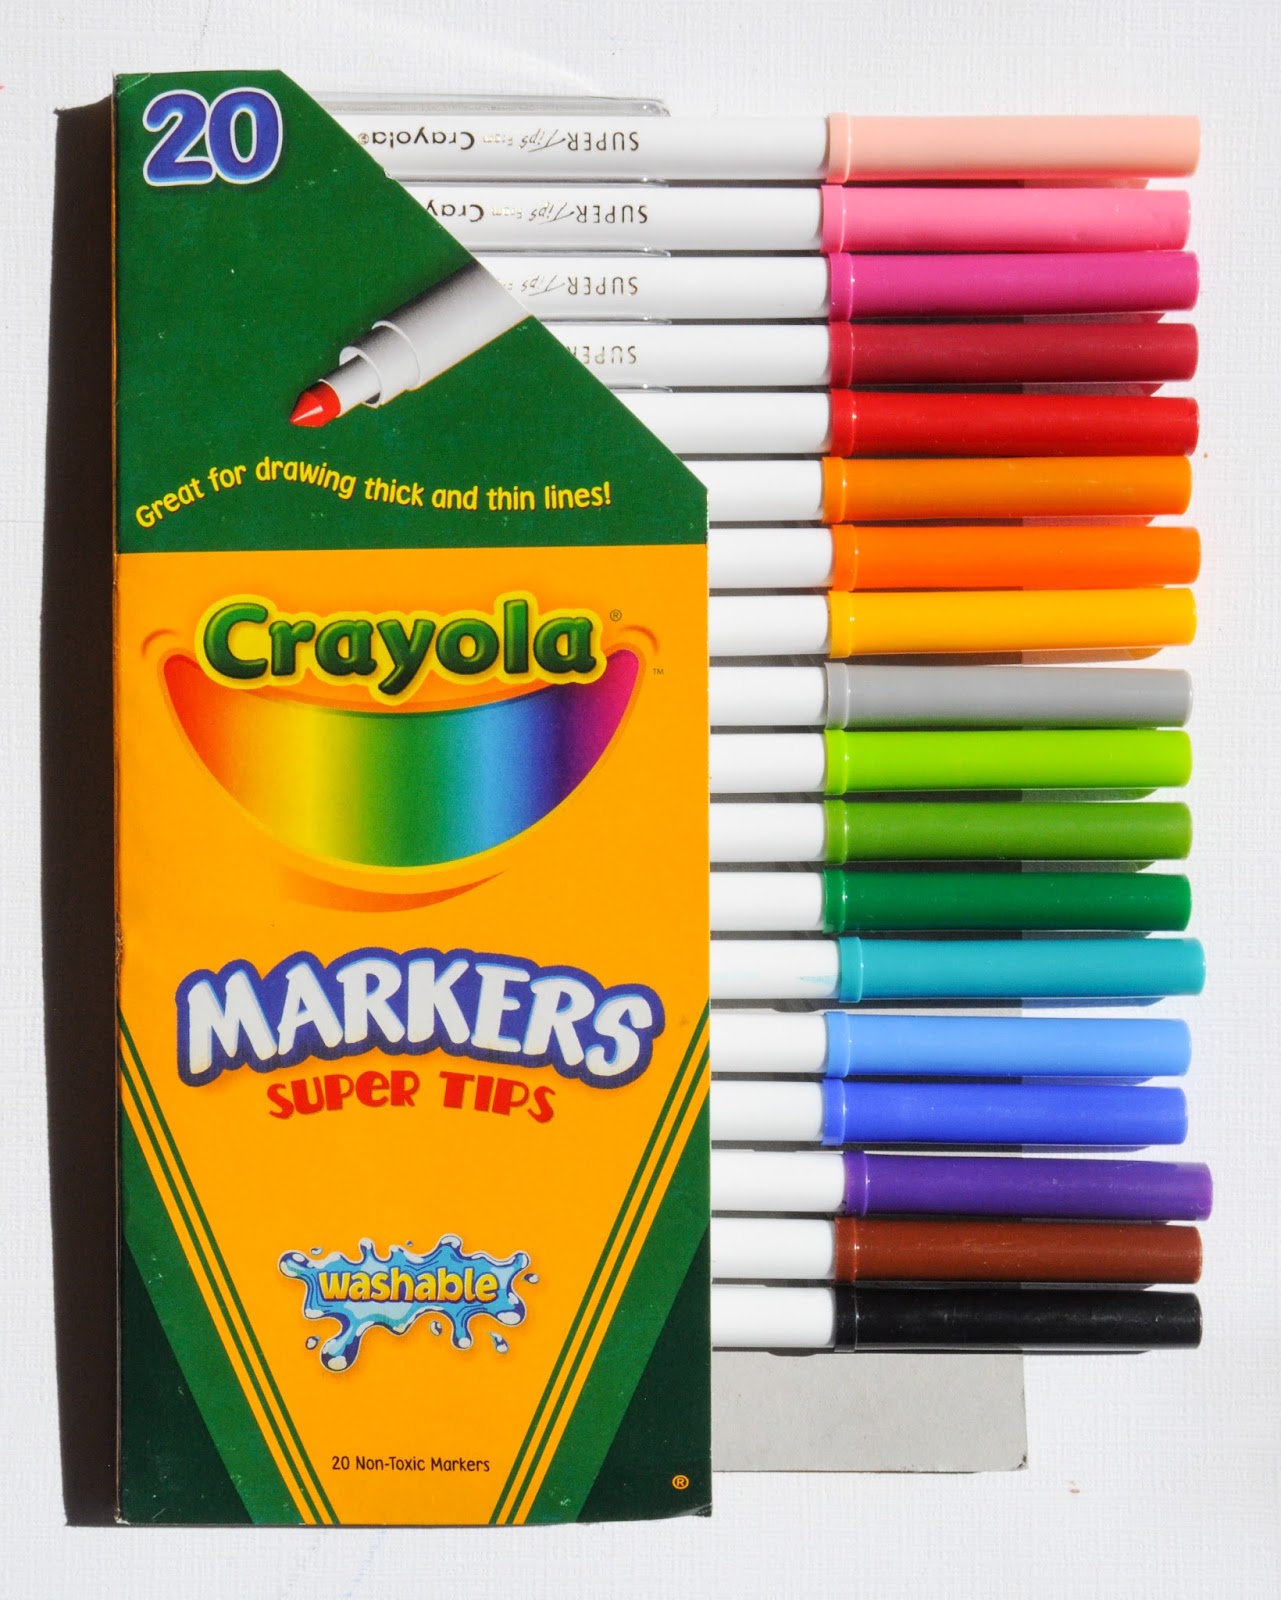 100 Count Crayola SuperTips Washable Markers: What's Inside the Box